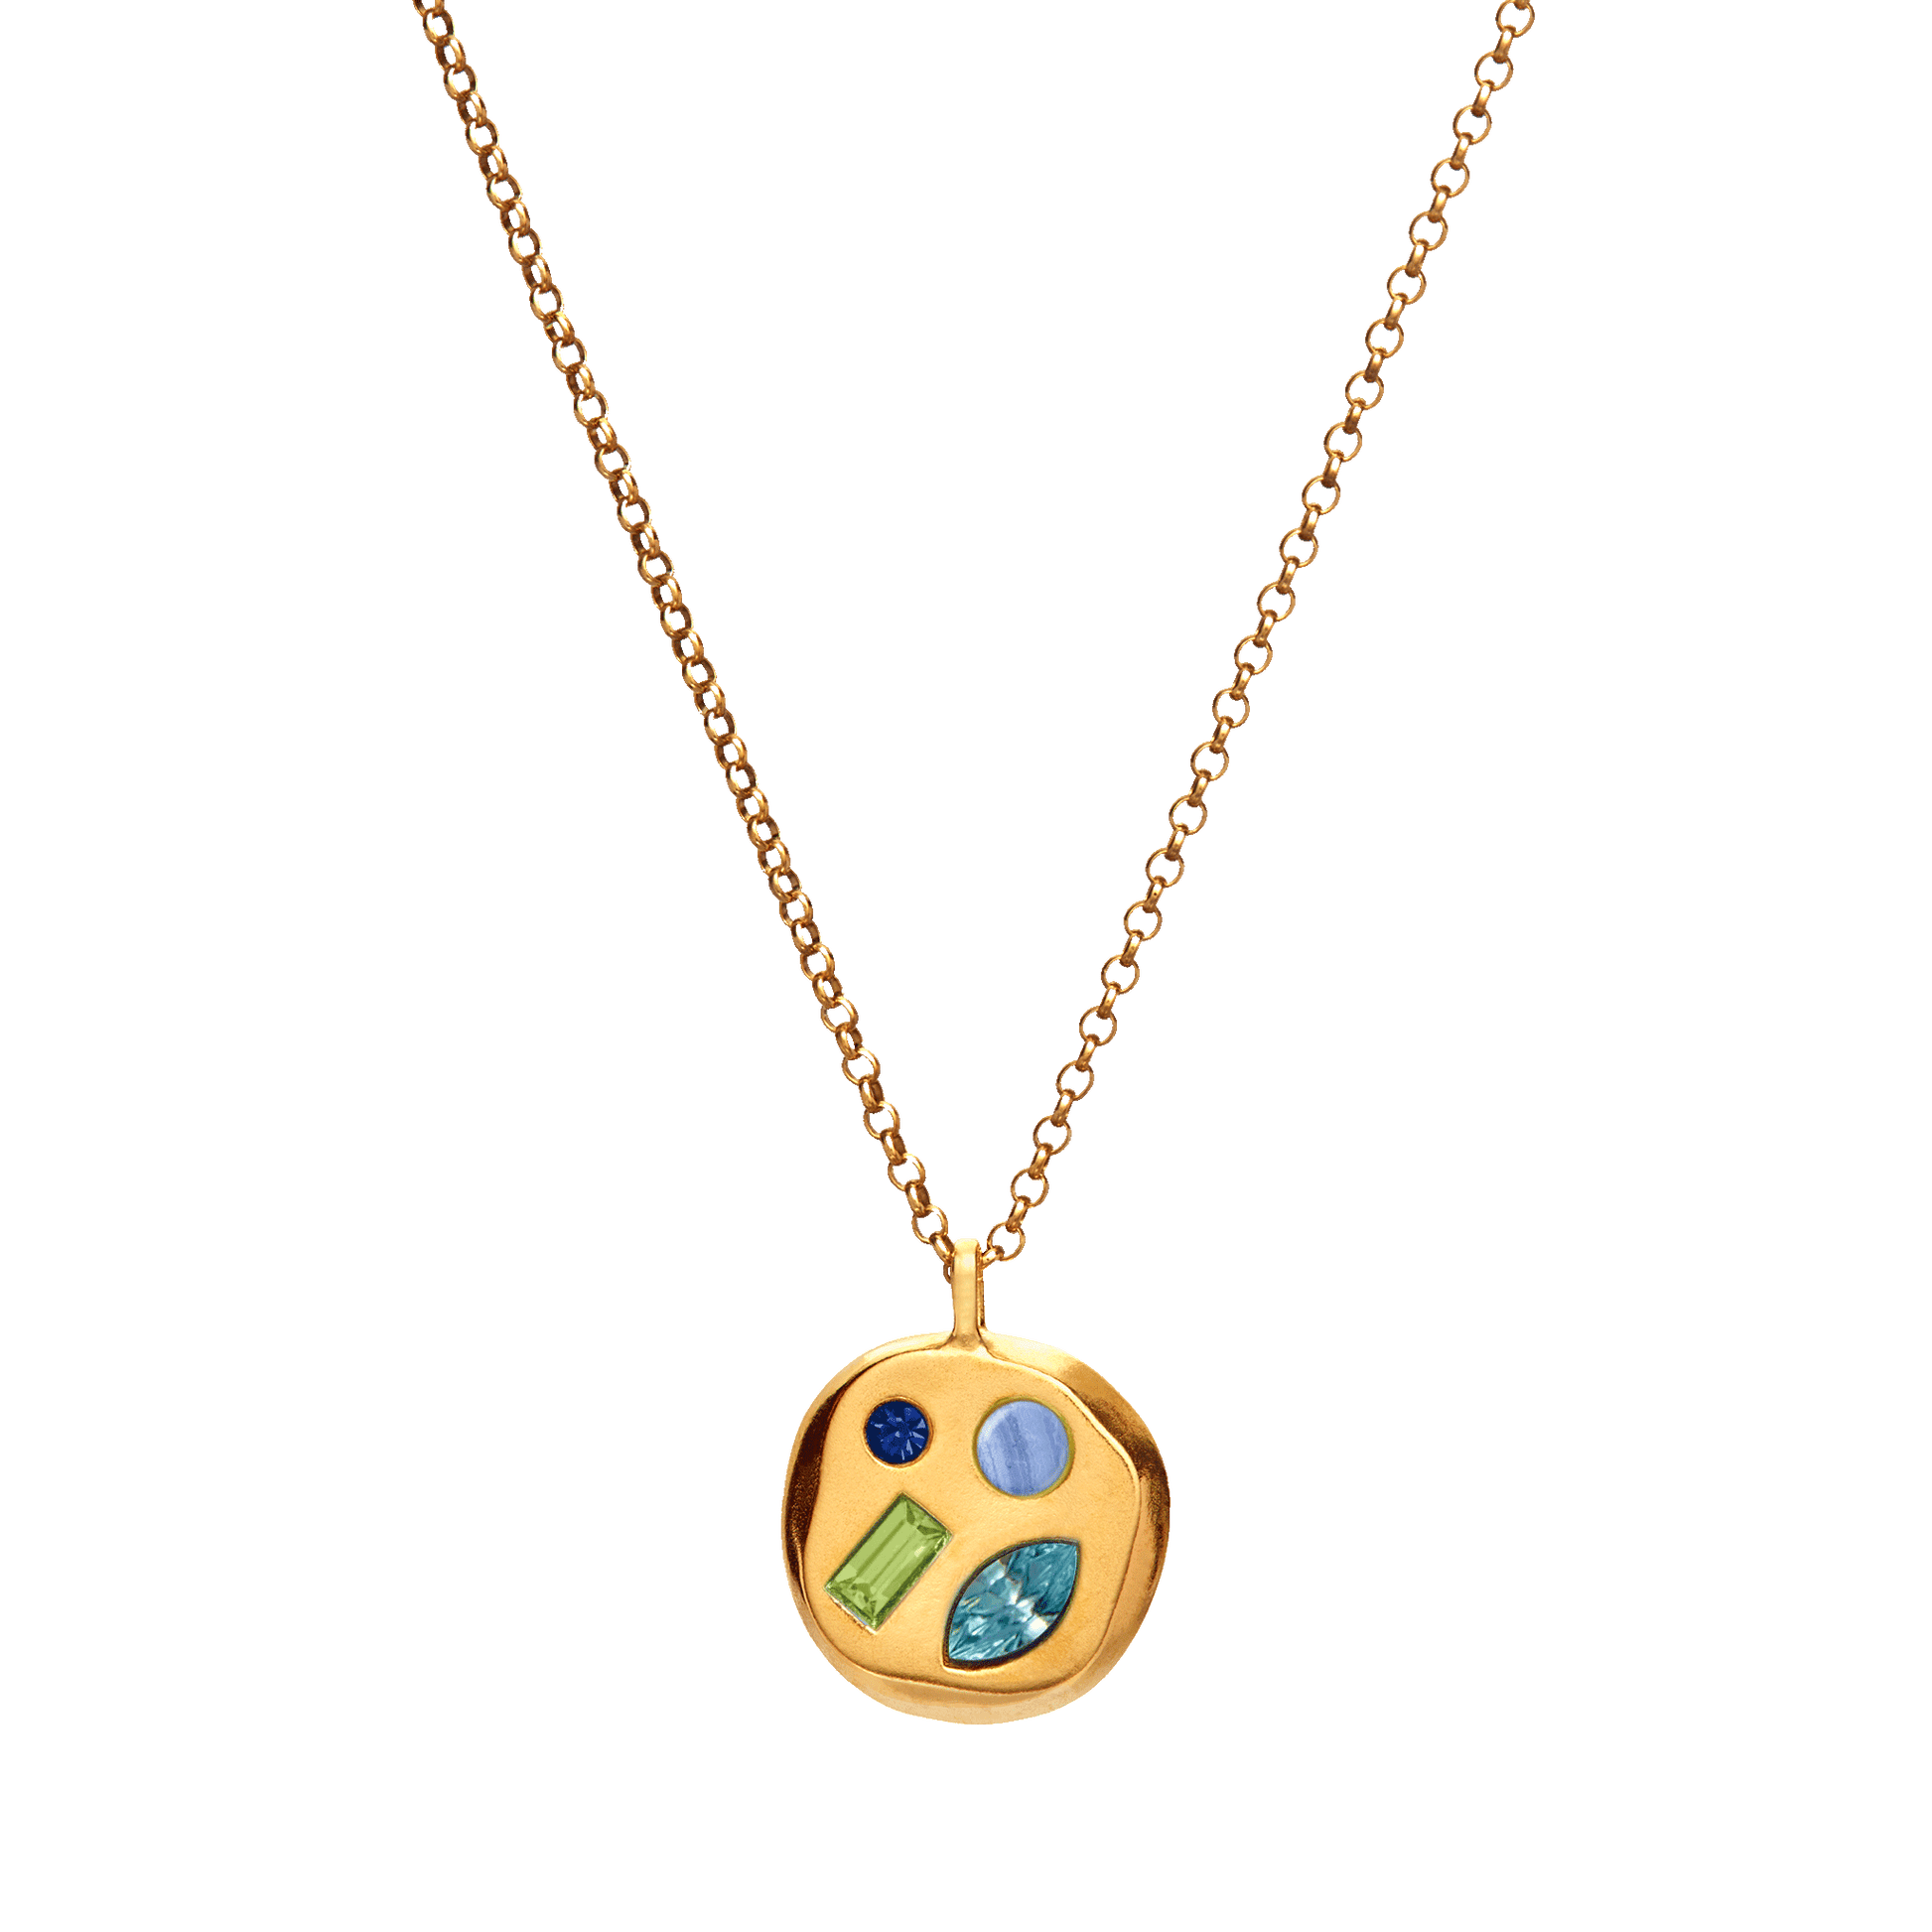 The March Second Pendant